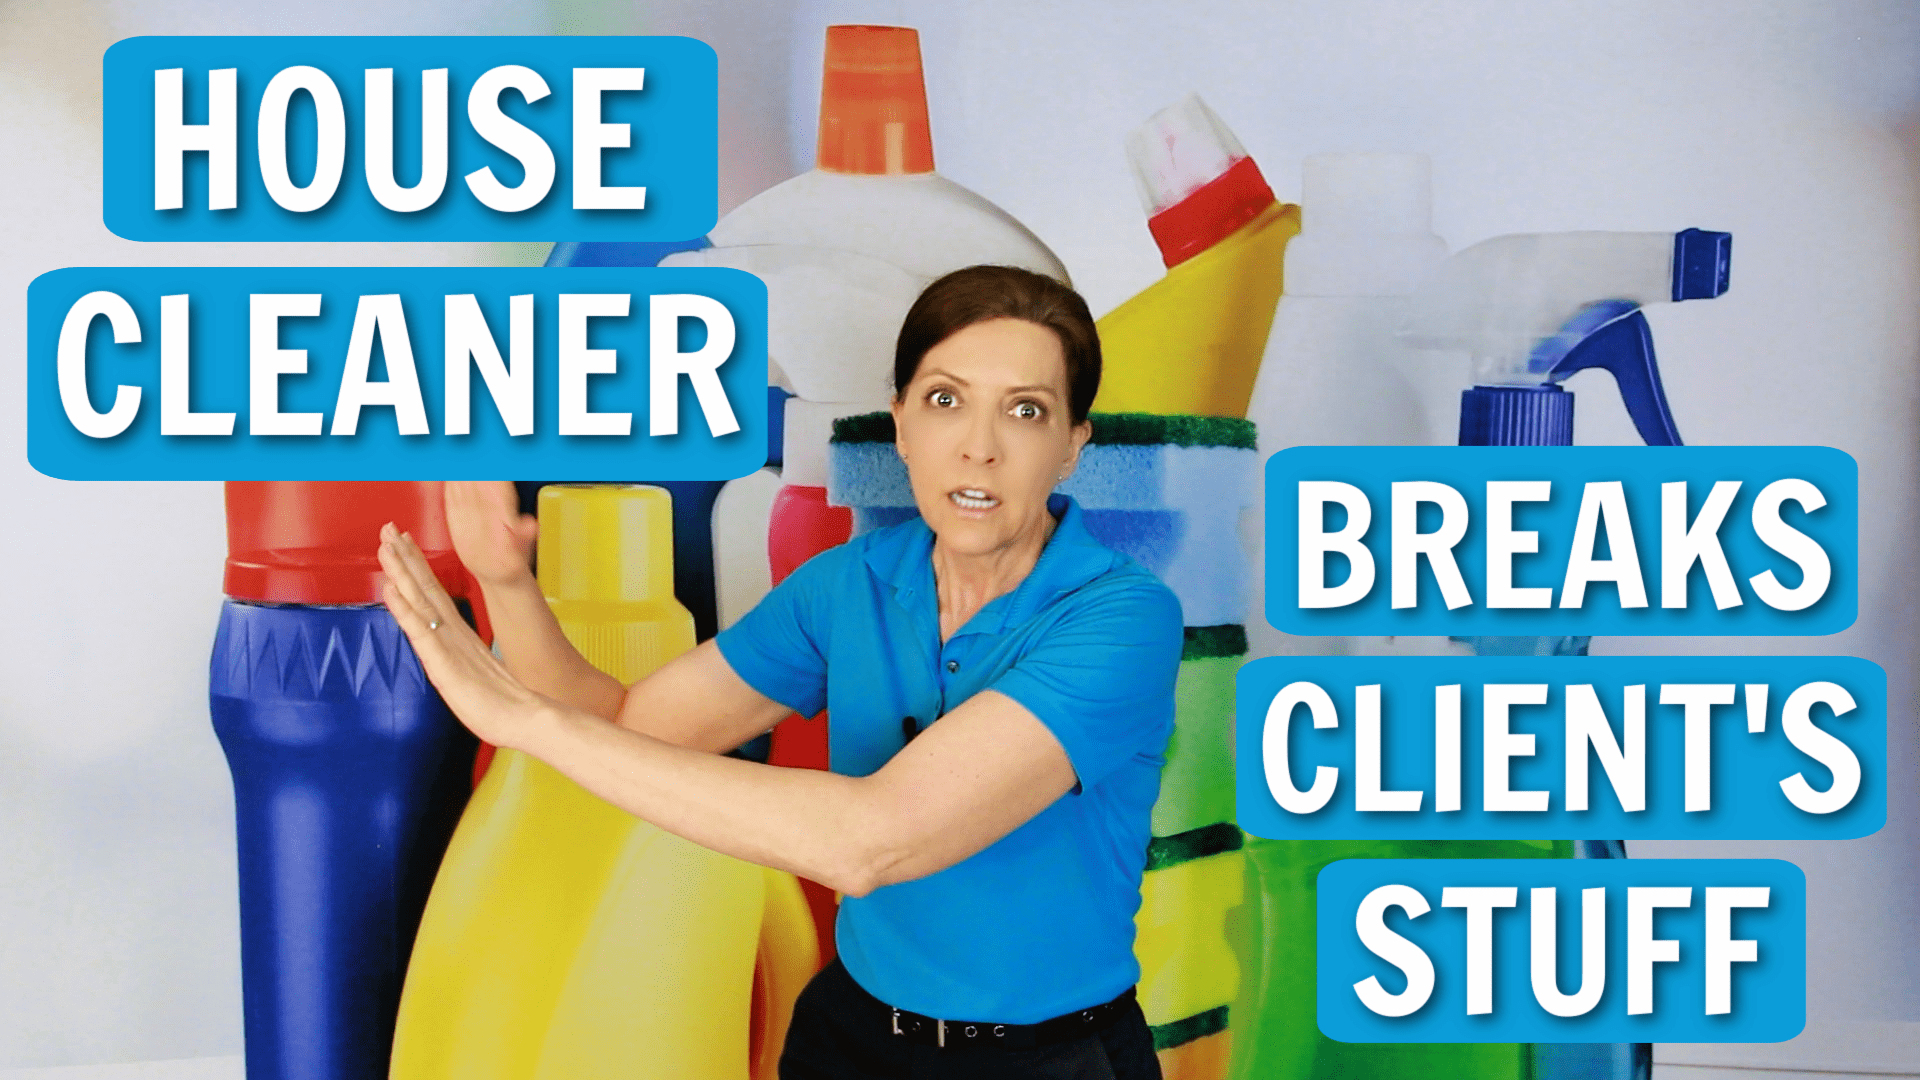 House Cleaner Breaks Client's Stuff Angela Brown Ask a House Cleaner